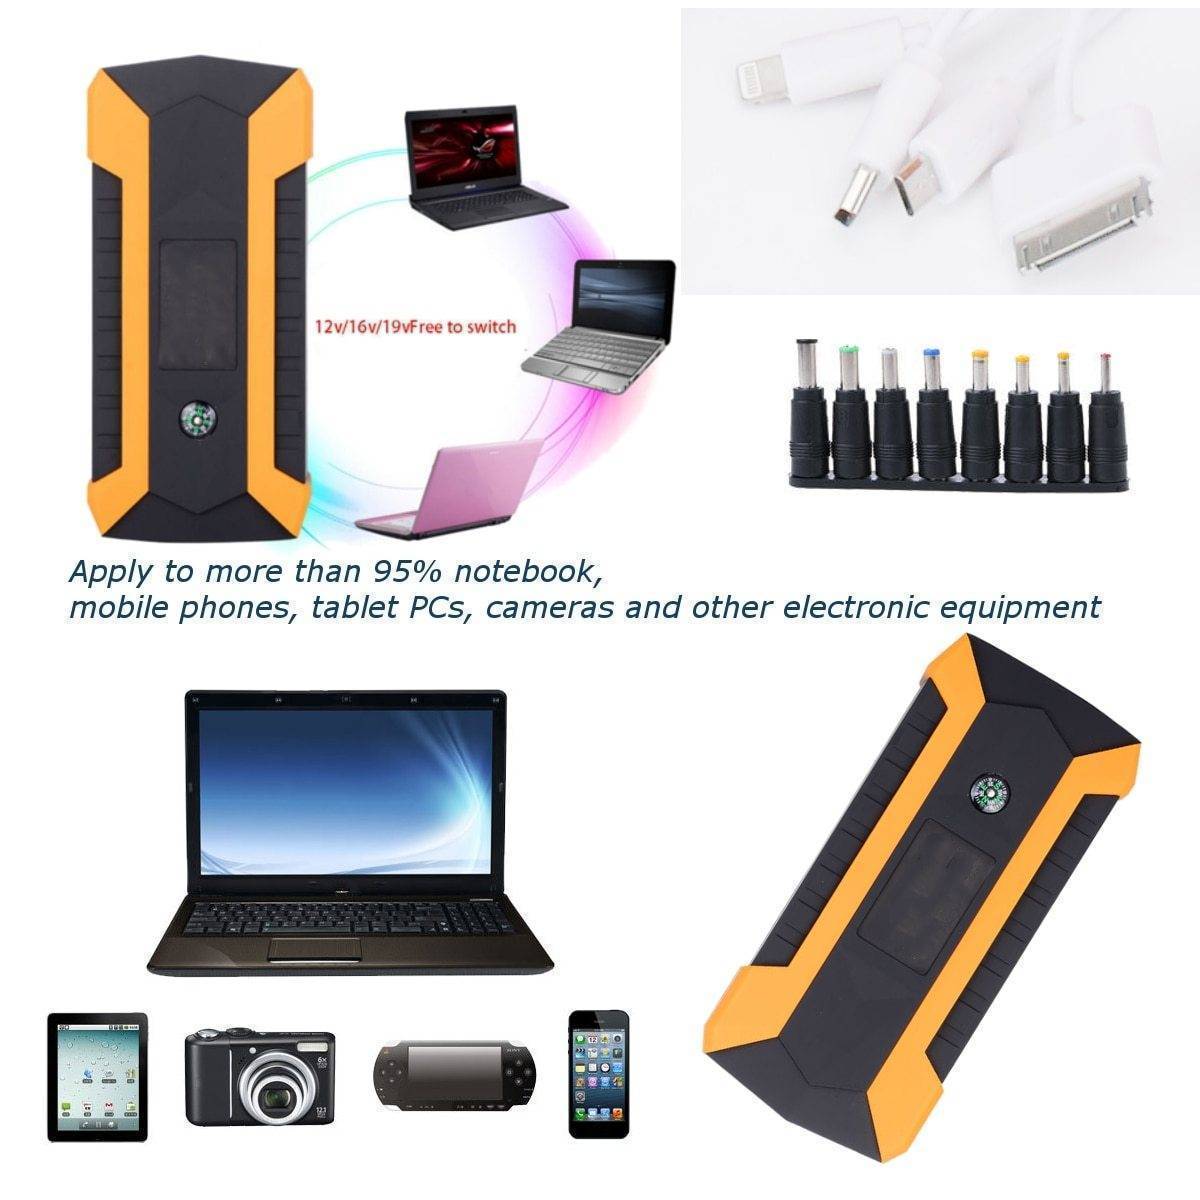 Car Jump Starter - Portable Battery Booster - Charger Power Bank Starting Device